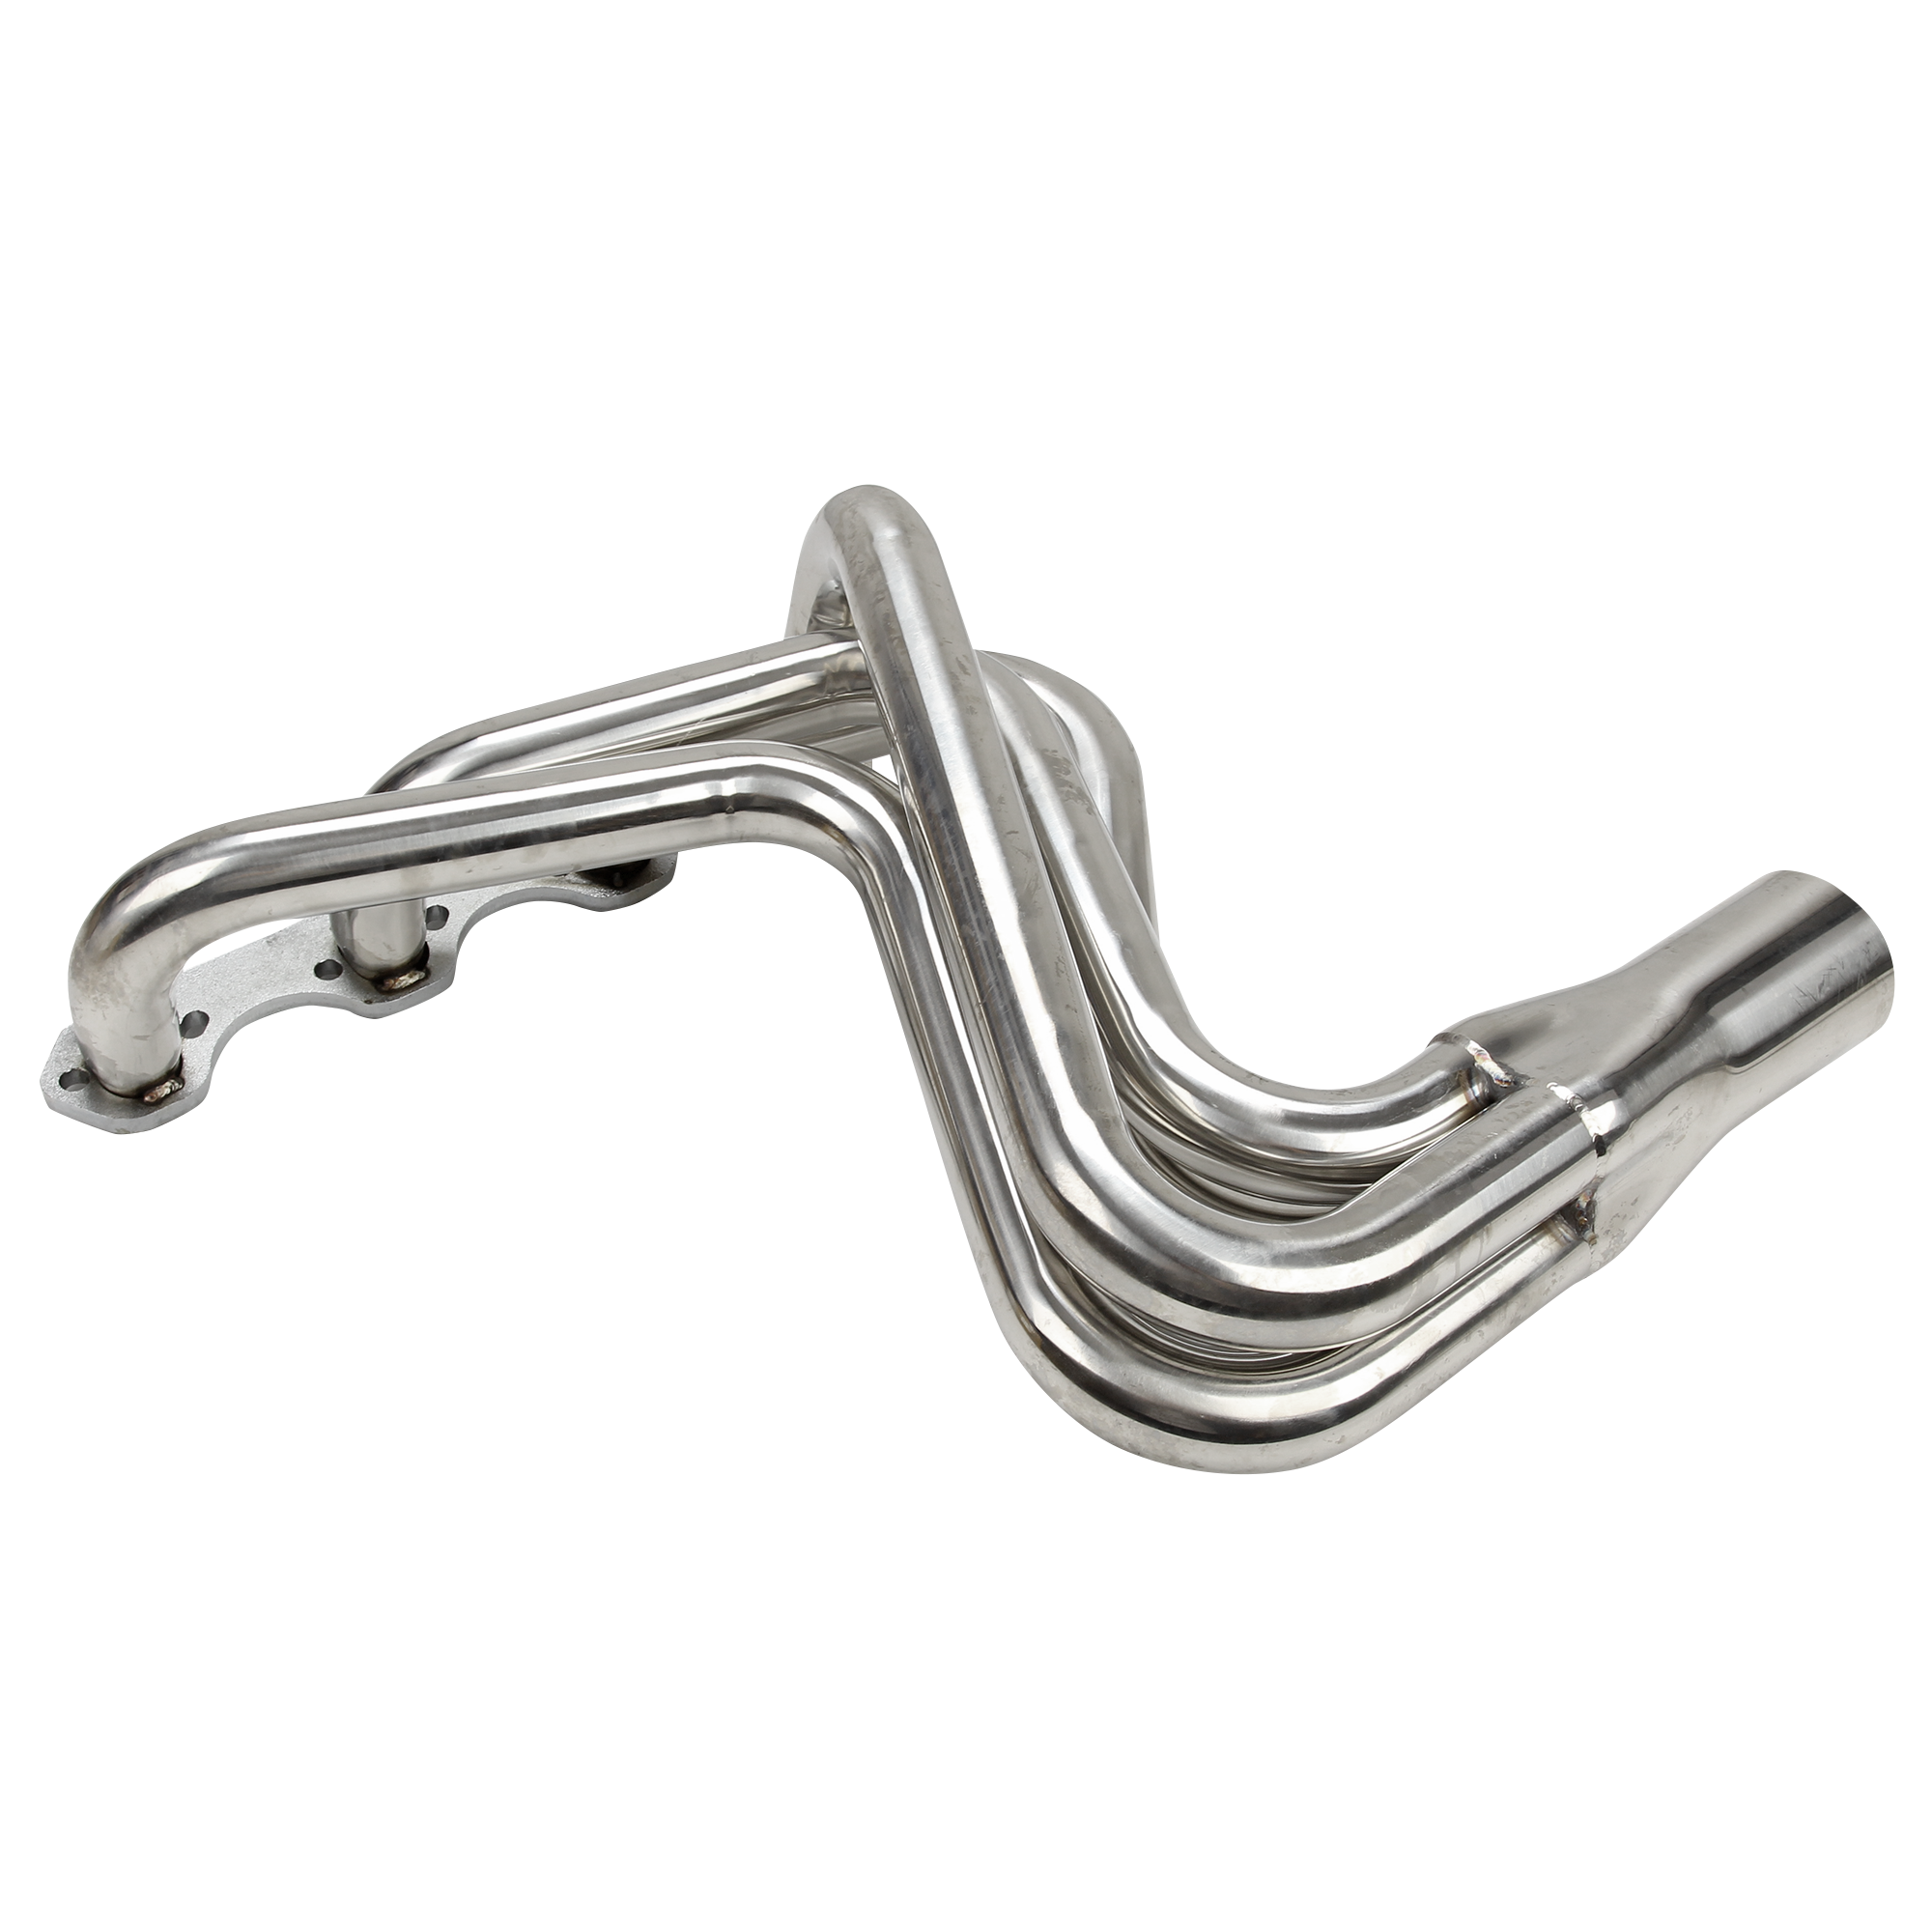 Racing Ss Exhaust Header Manifold For 87 96 Ford F 150f 250bronco